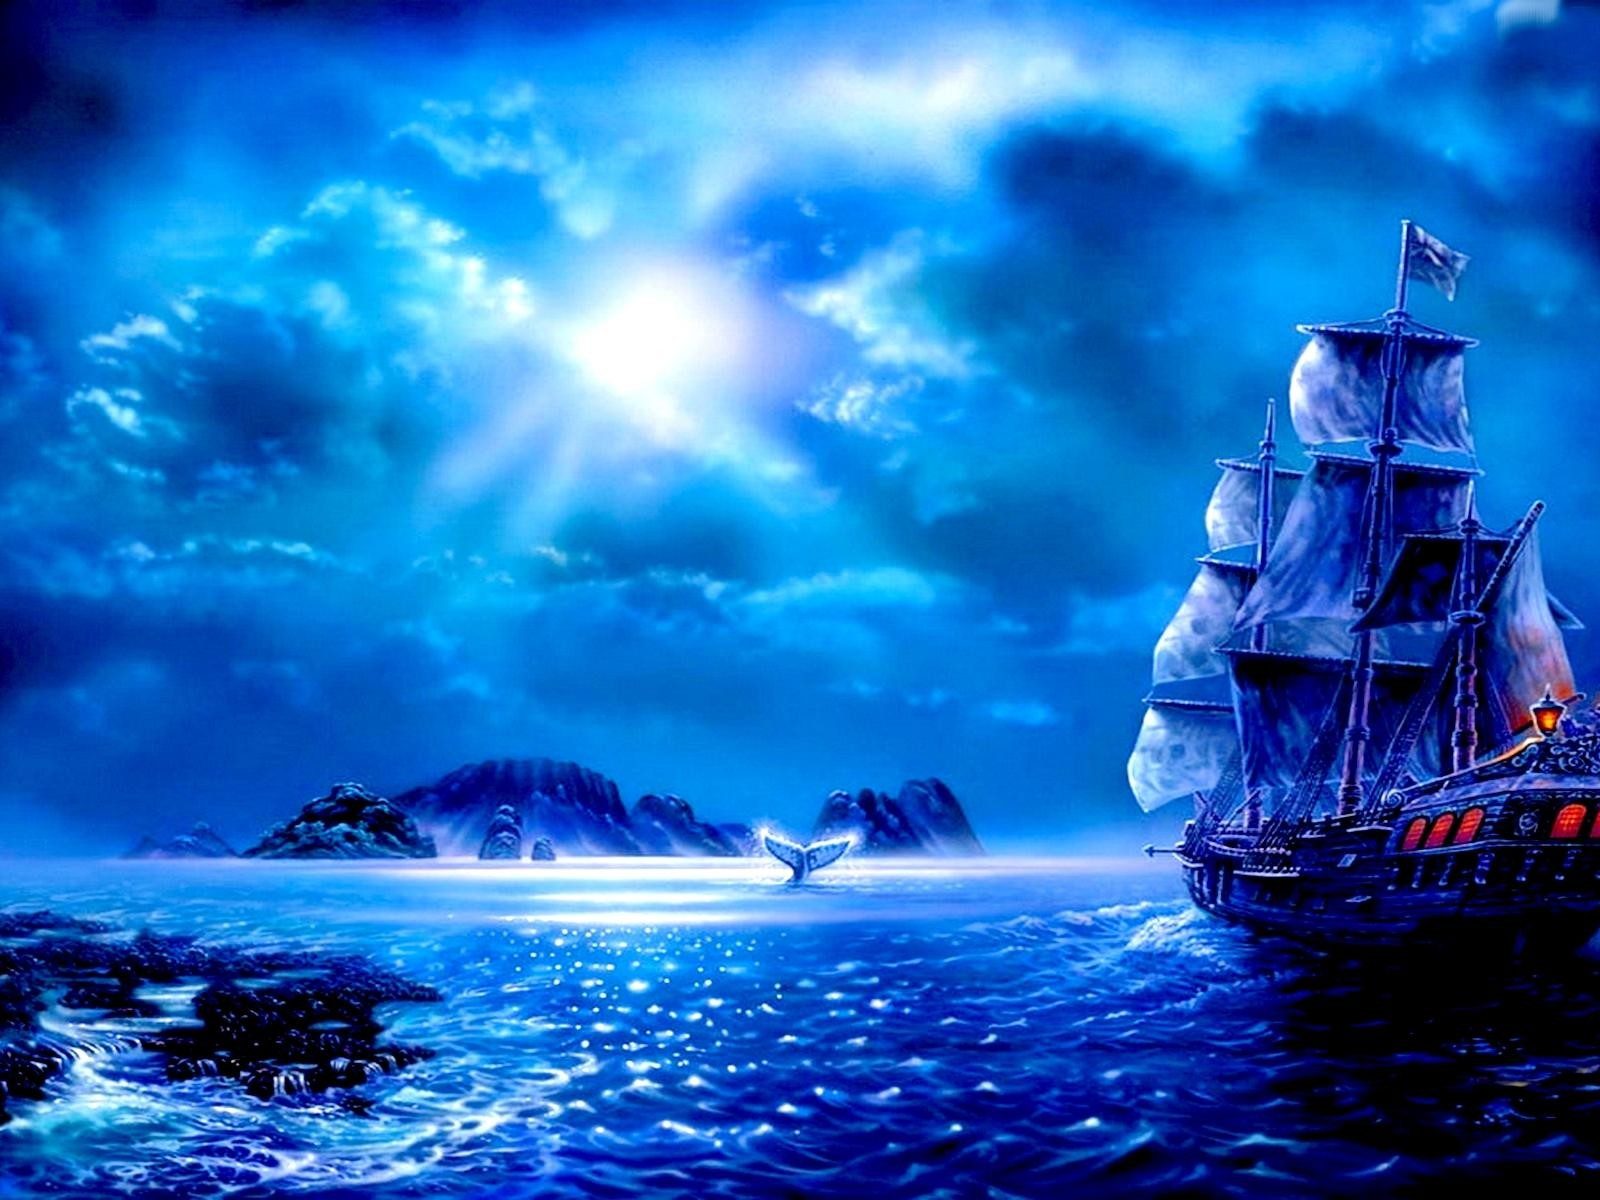 Pirate Ship Latest Hd Wallpapers Free Download For Mobile Phones Tablet And PC 1920x1200 : Wallpapers13